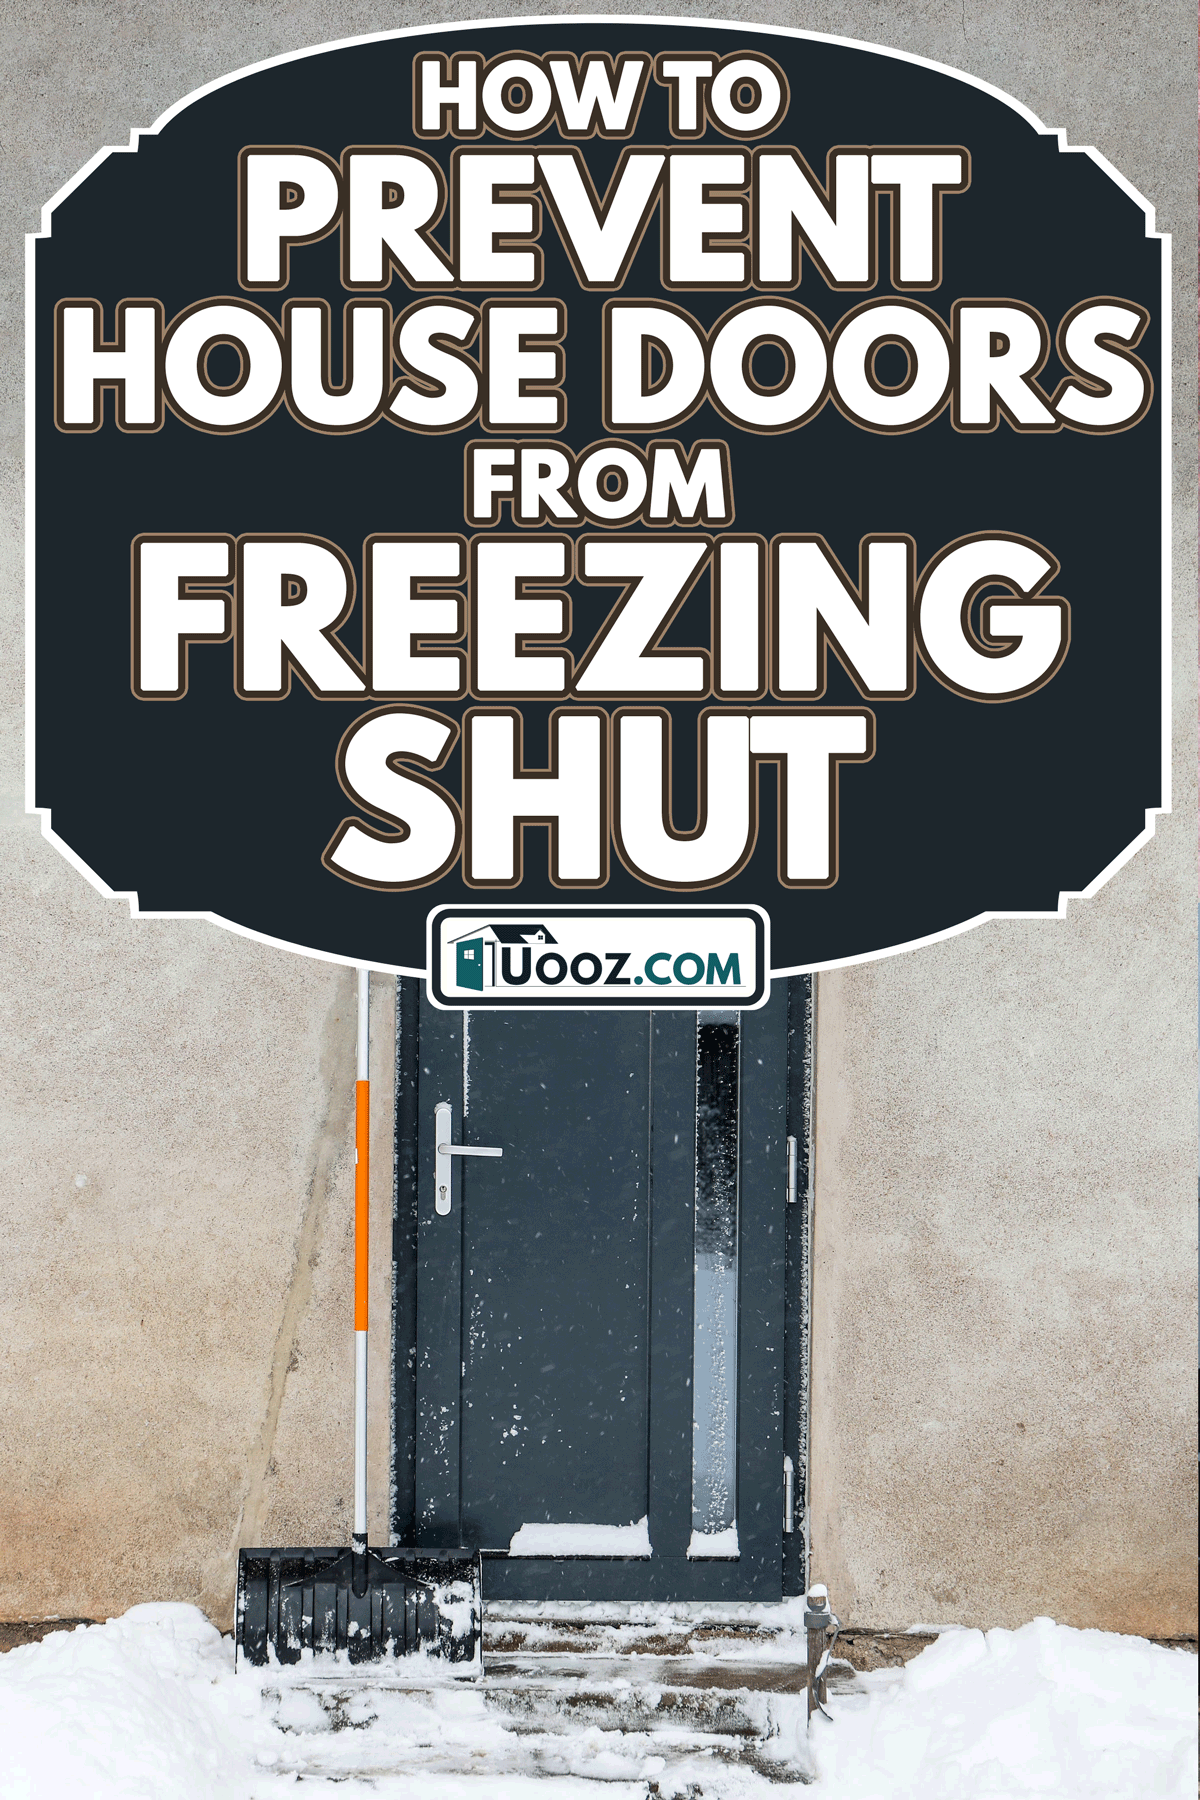 Wooden house door with snow shovel, How To Prevent House Doors From Freezing Shut